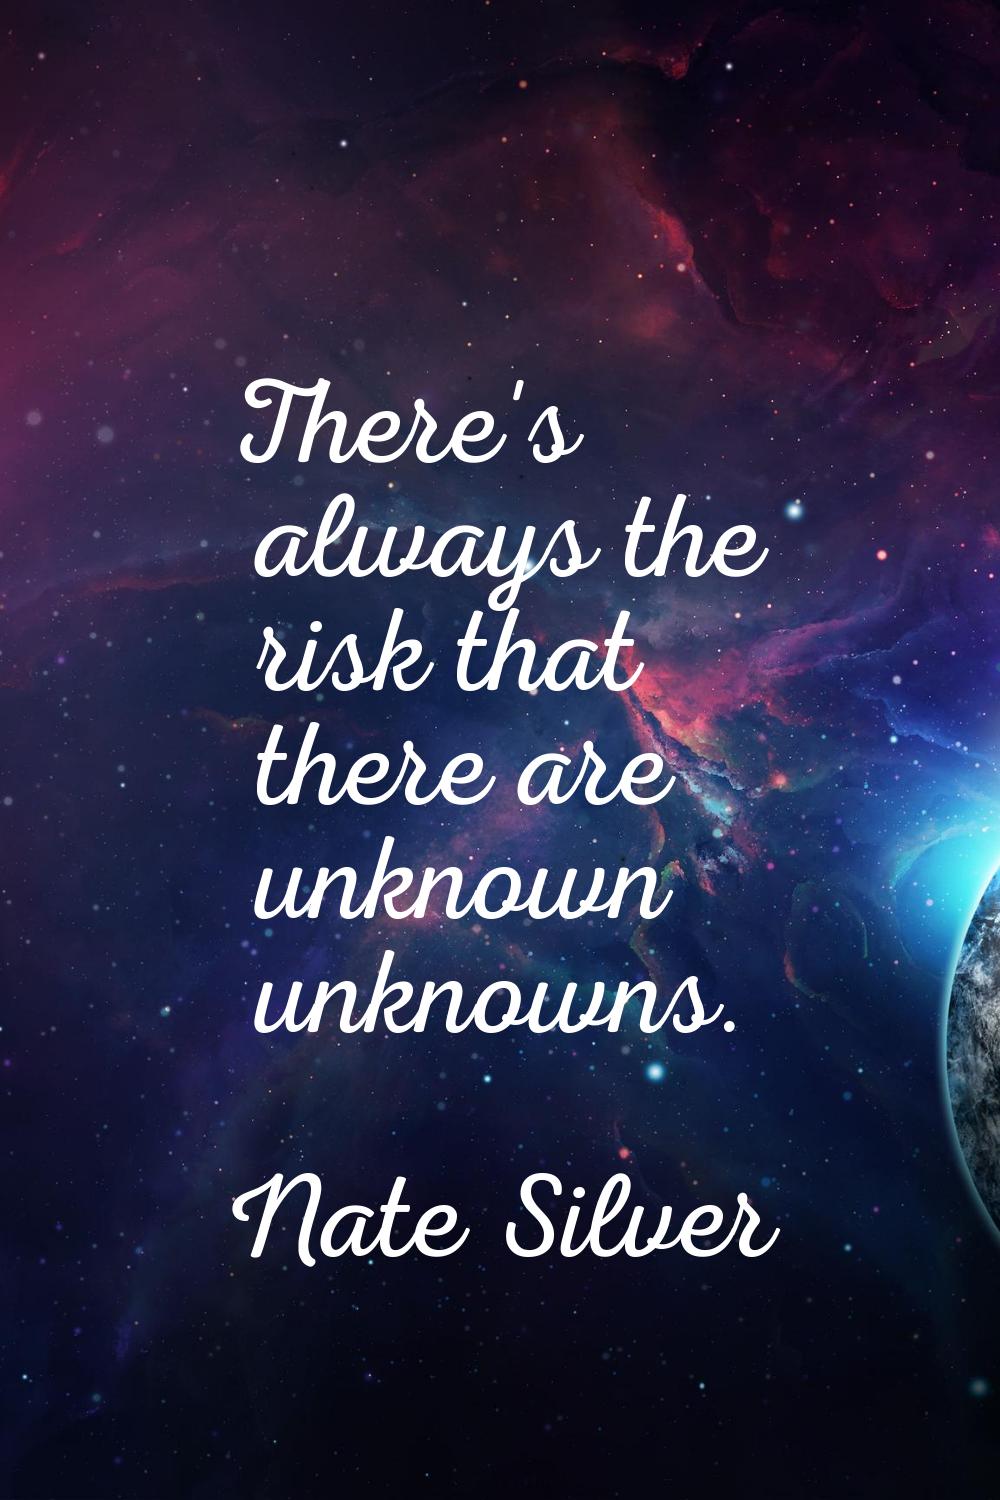 There's always the risk that there are unknown unknowns.